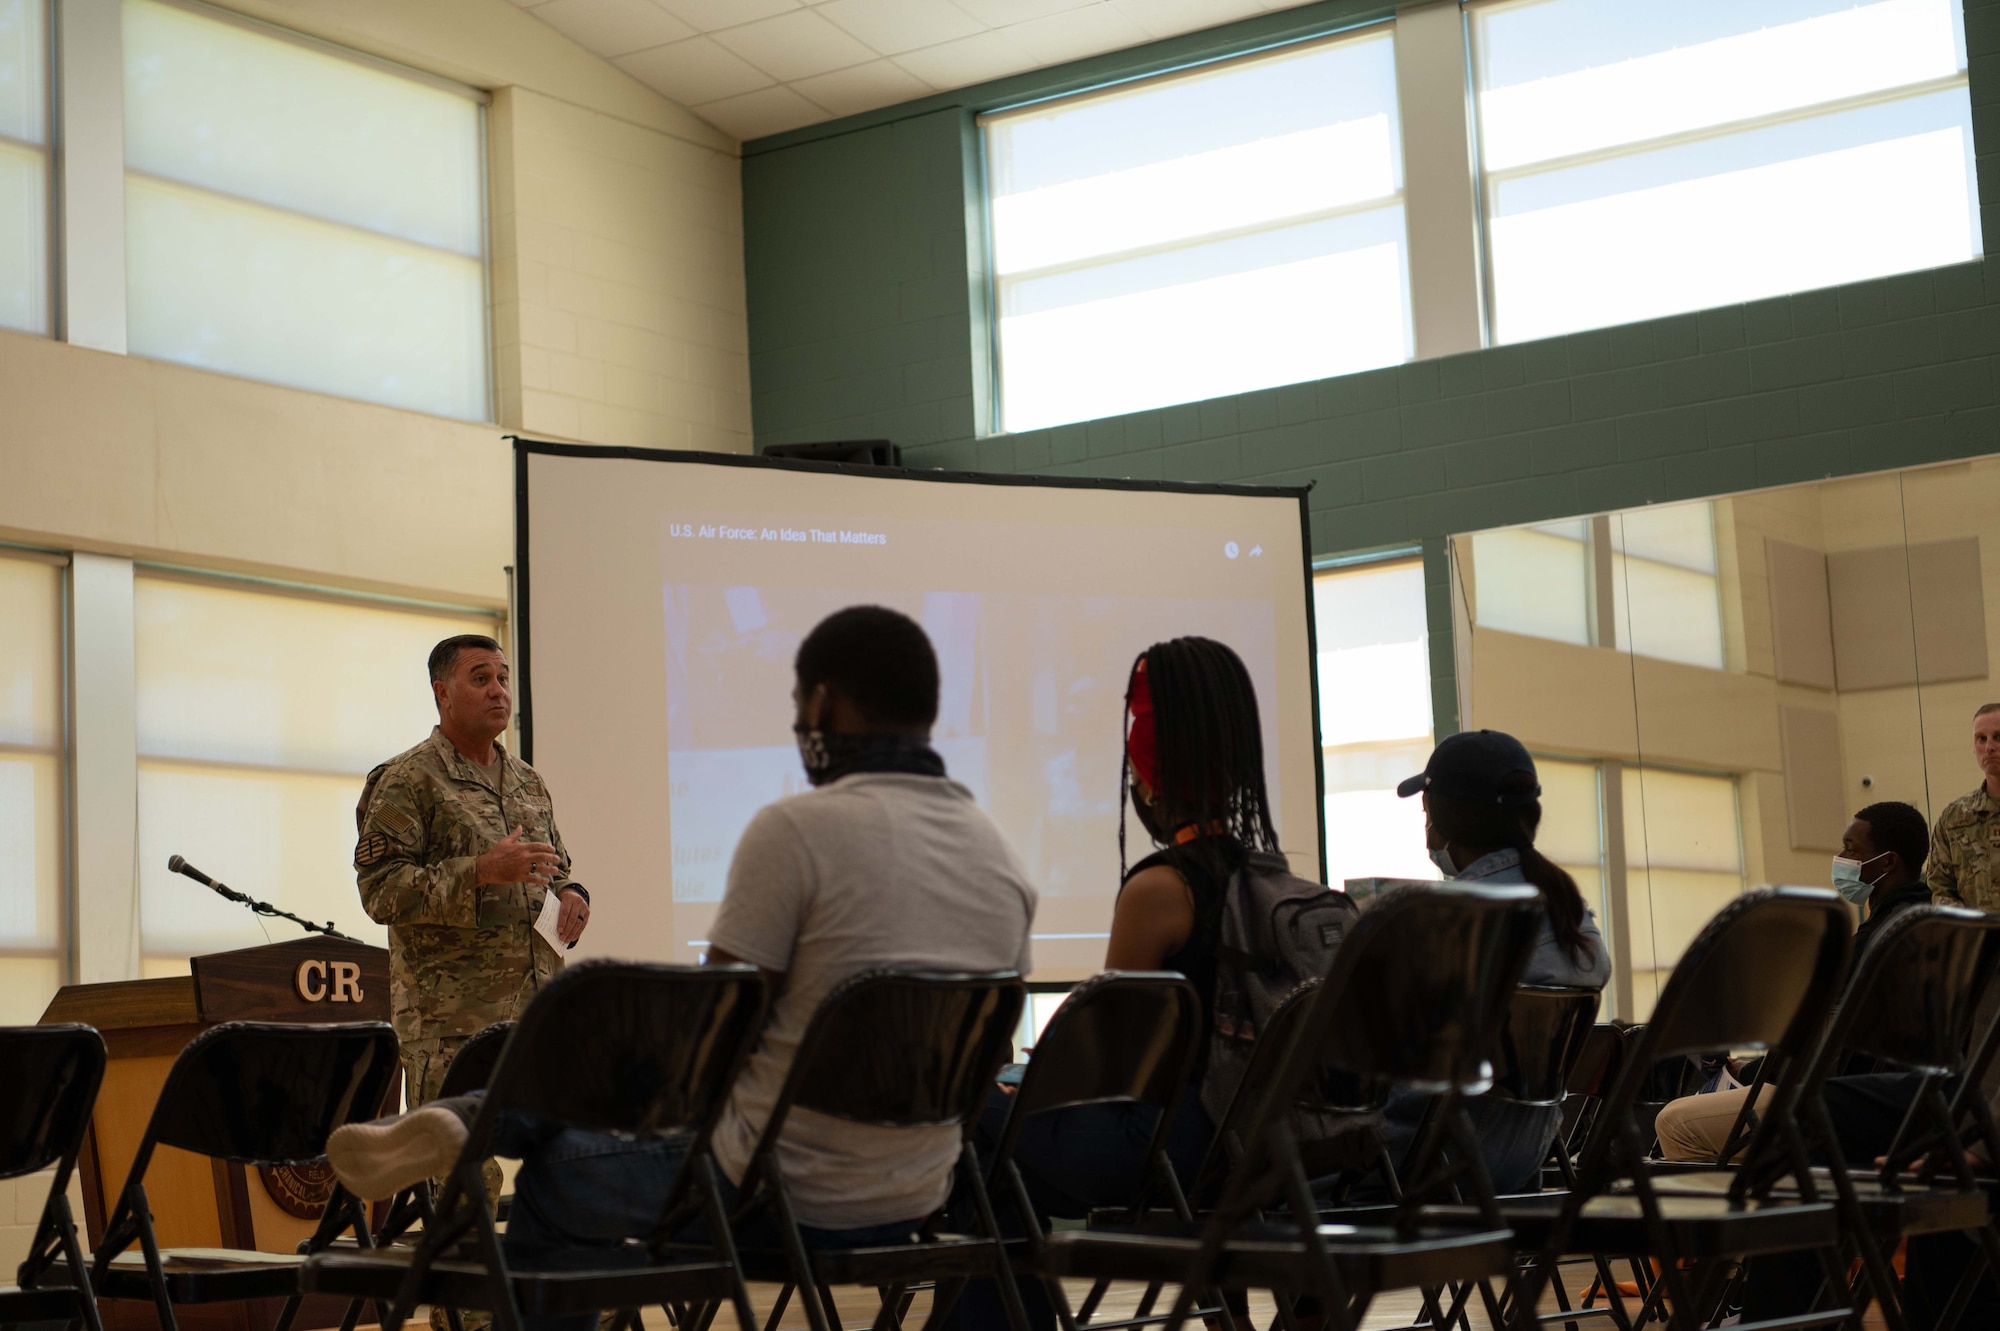 U.S. Air Force Maj. Gen. Eric Hill, Air Force Special Operations Command deputy commander, speaks to students at Florida A&M University about career opportunities Sept. 23, 2021. FAMU, one of the top historically black colleges in the nation, graduates highly intelligent and motivated individuals with diverse experiences. (U.S. Air Force photo by Staff Sgt. Rito Smith)